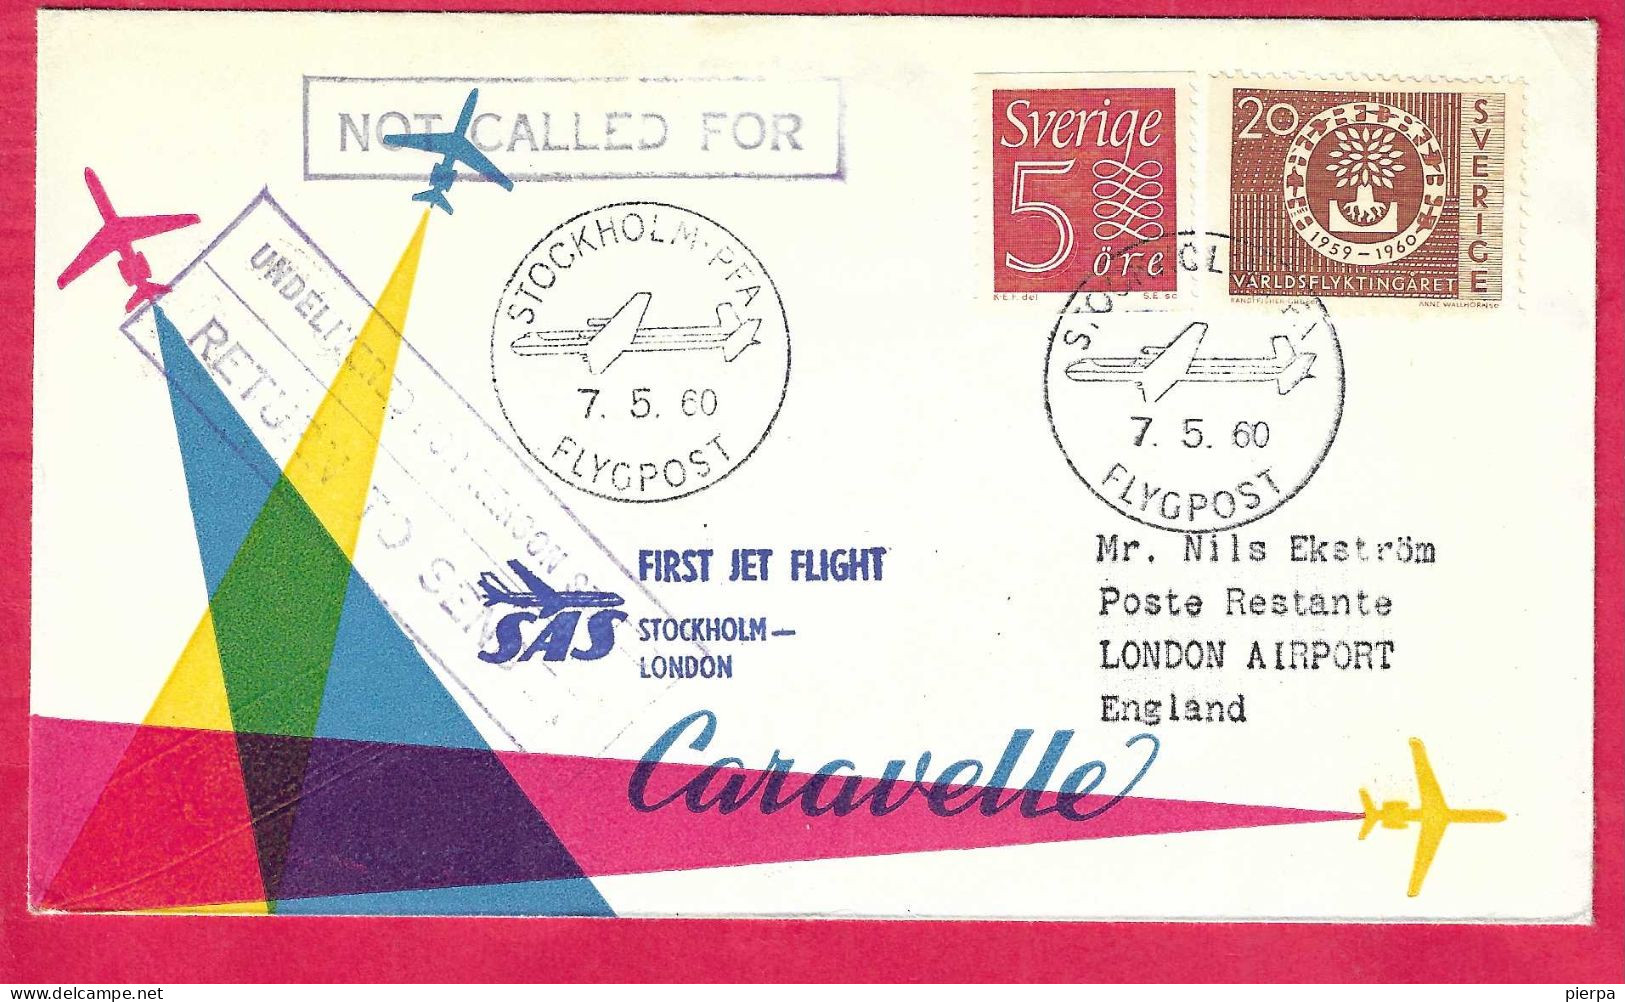 SVERIGE - FIRST CARAVELLE FLIGHT SAS  FROM STOCKHOLM TO LONDON *7.5.60* ON OFFICIAL COVER - Briefe U. Dokumente